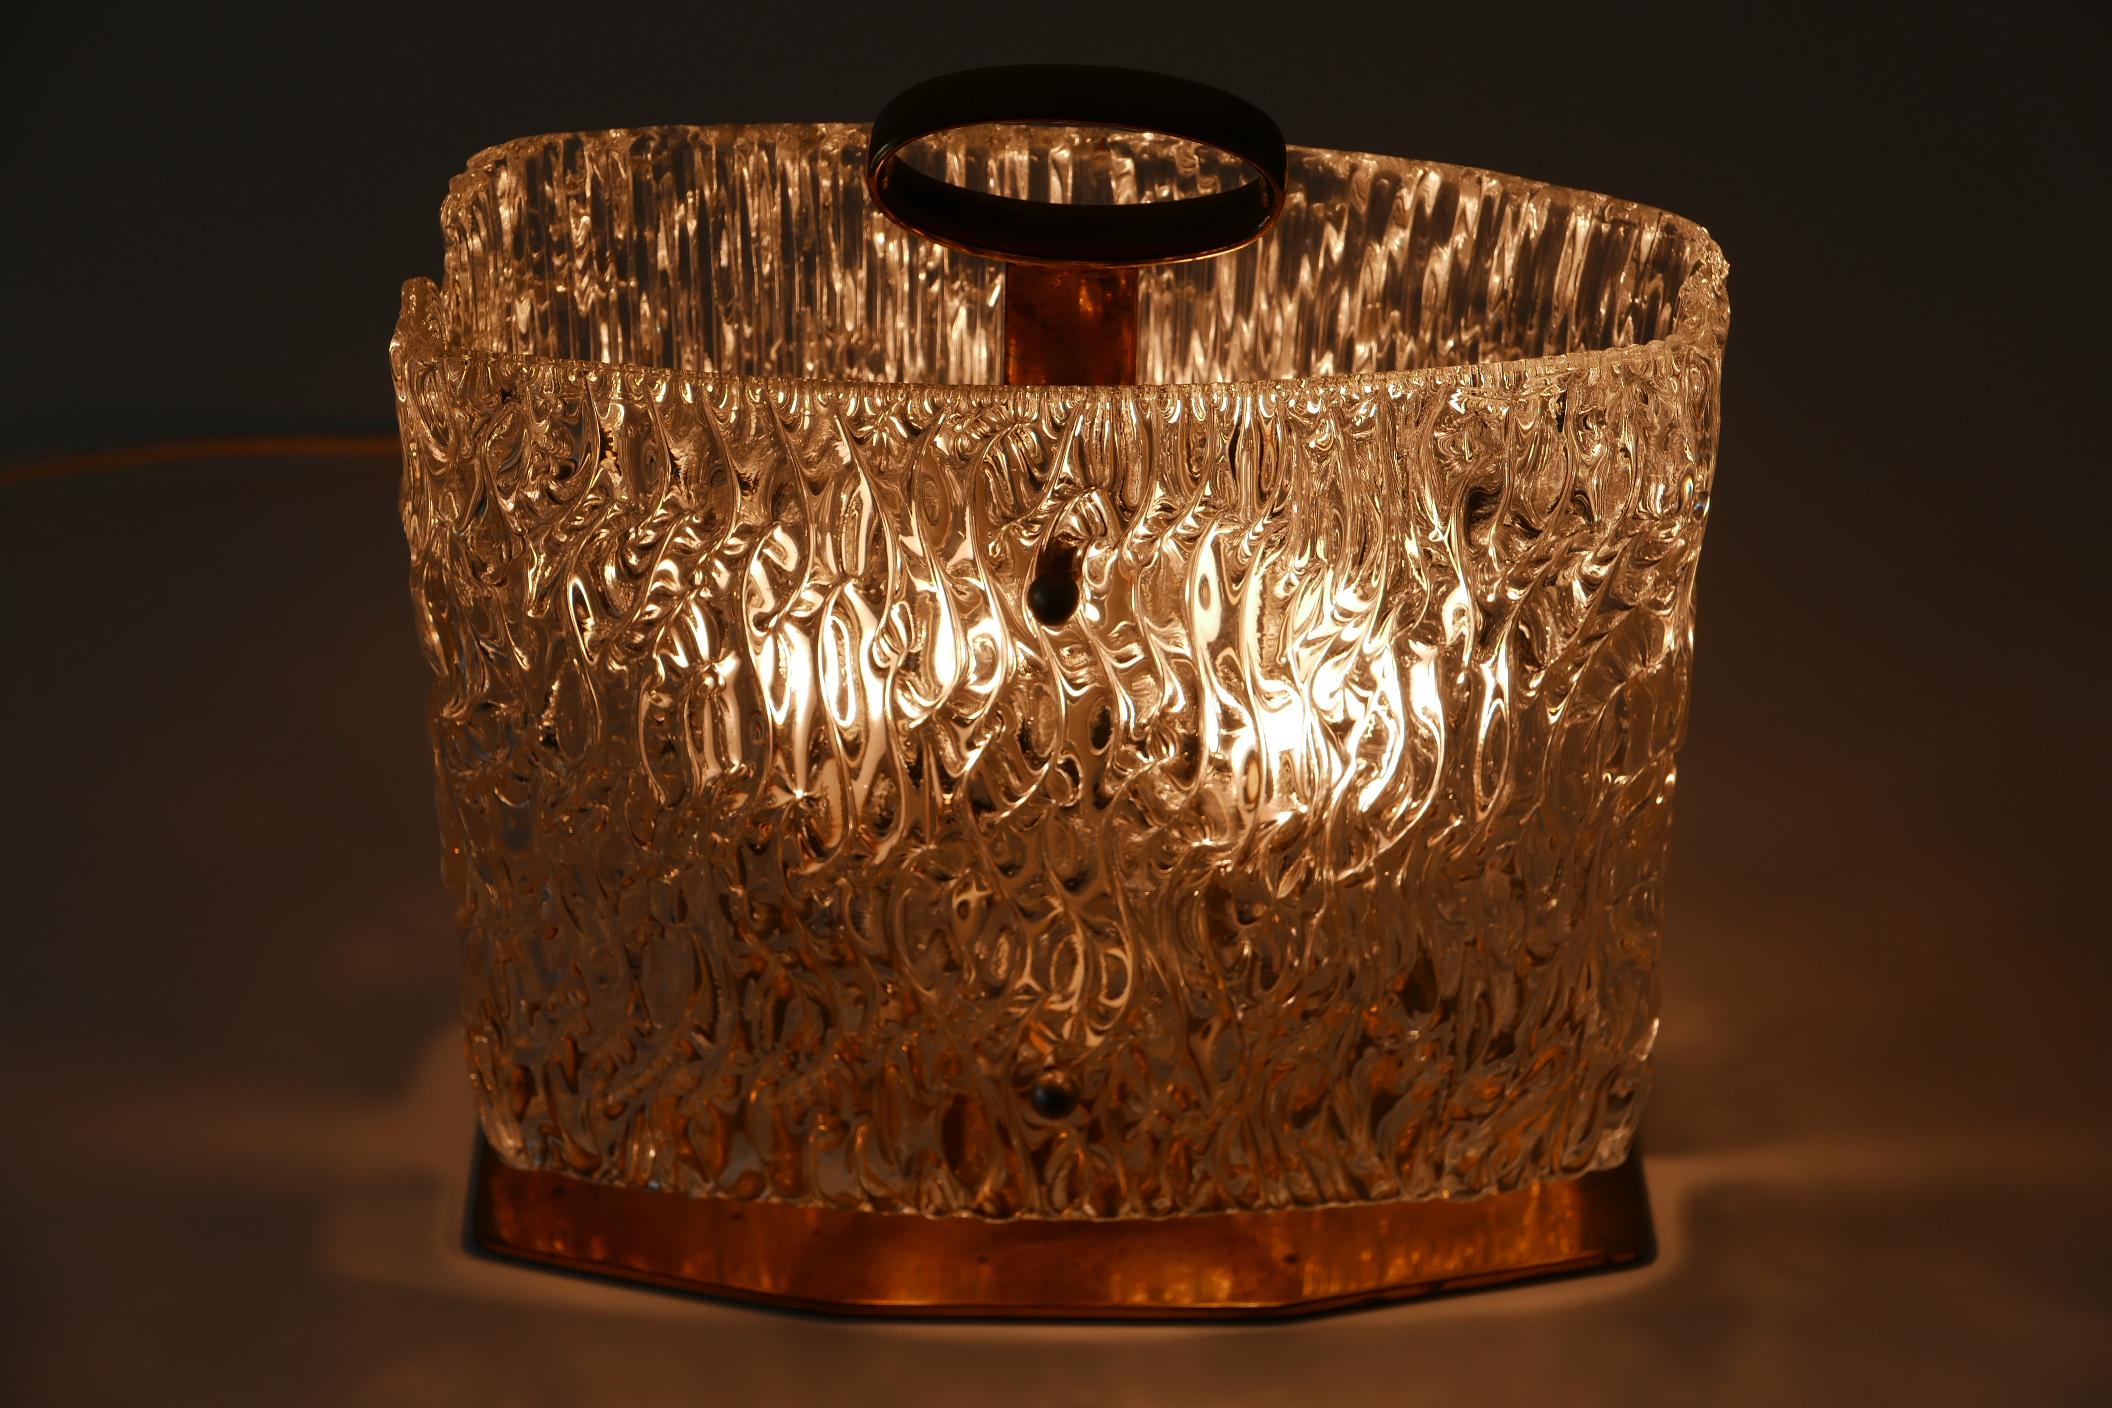 Exceptional Mid-Century Modern Table Lamp with Ice Glass Shade, 1950s, Italy For Sale 9